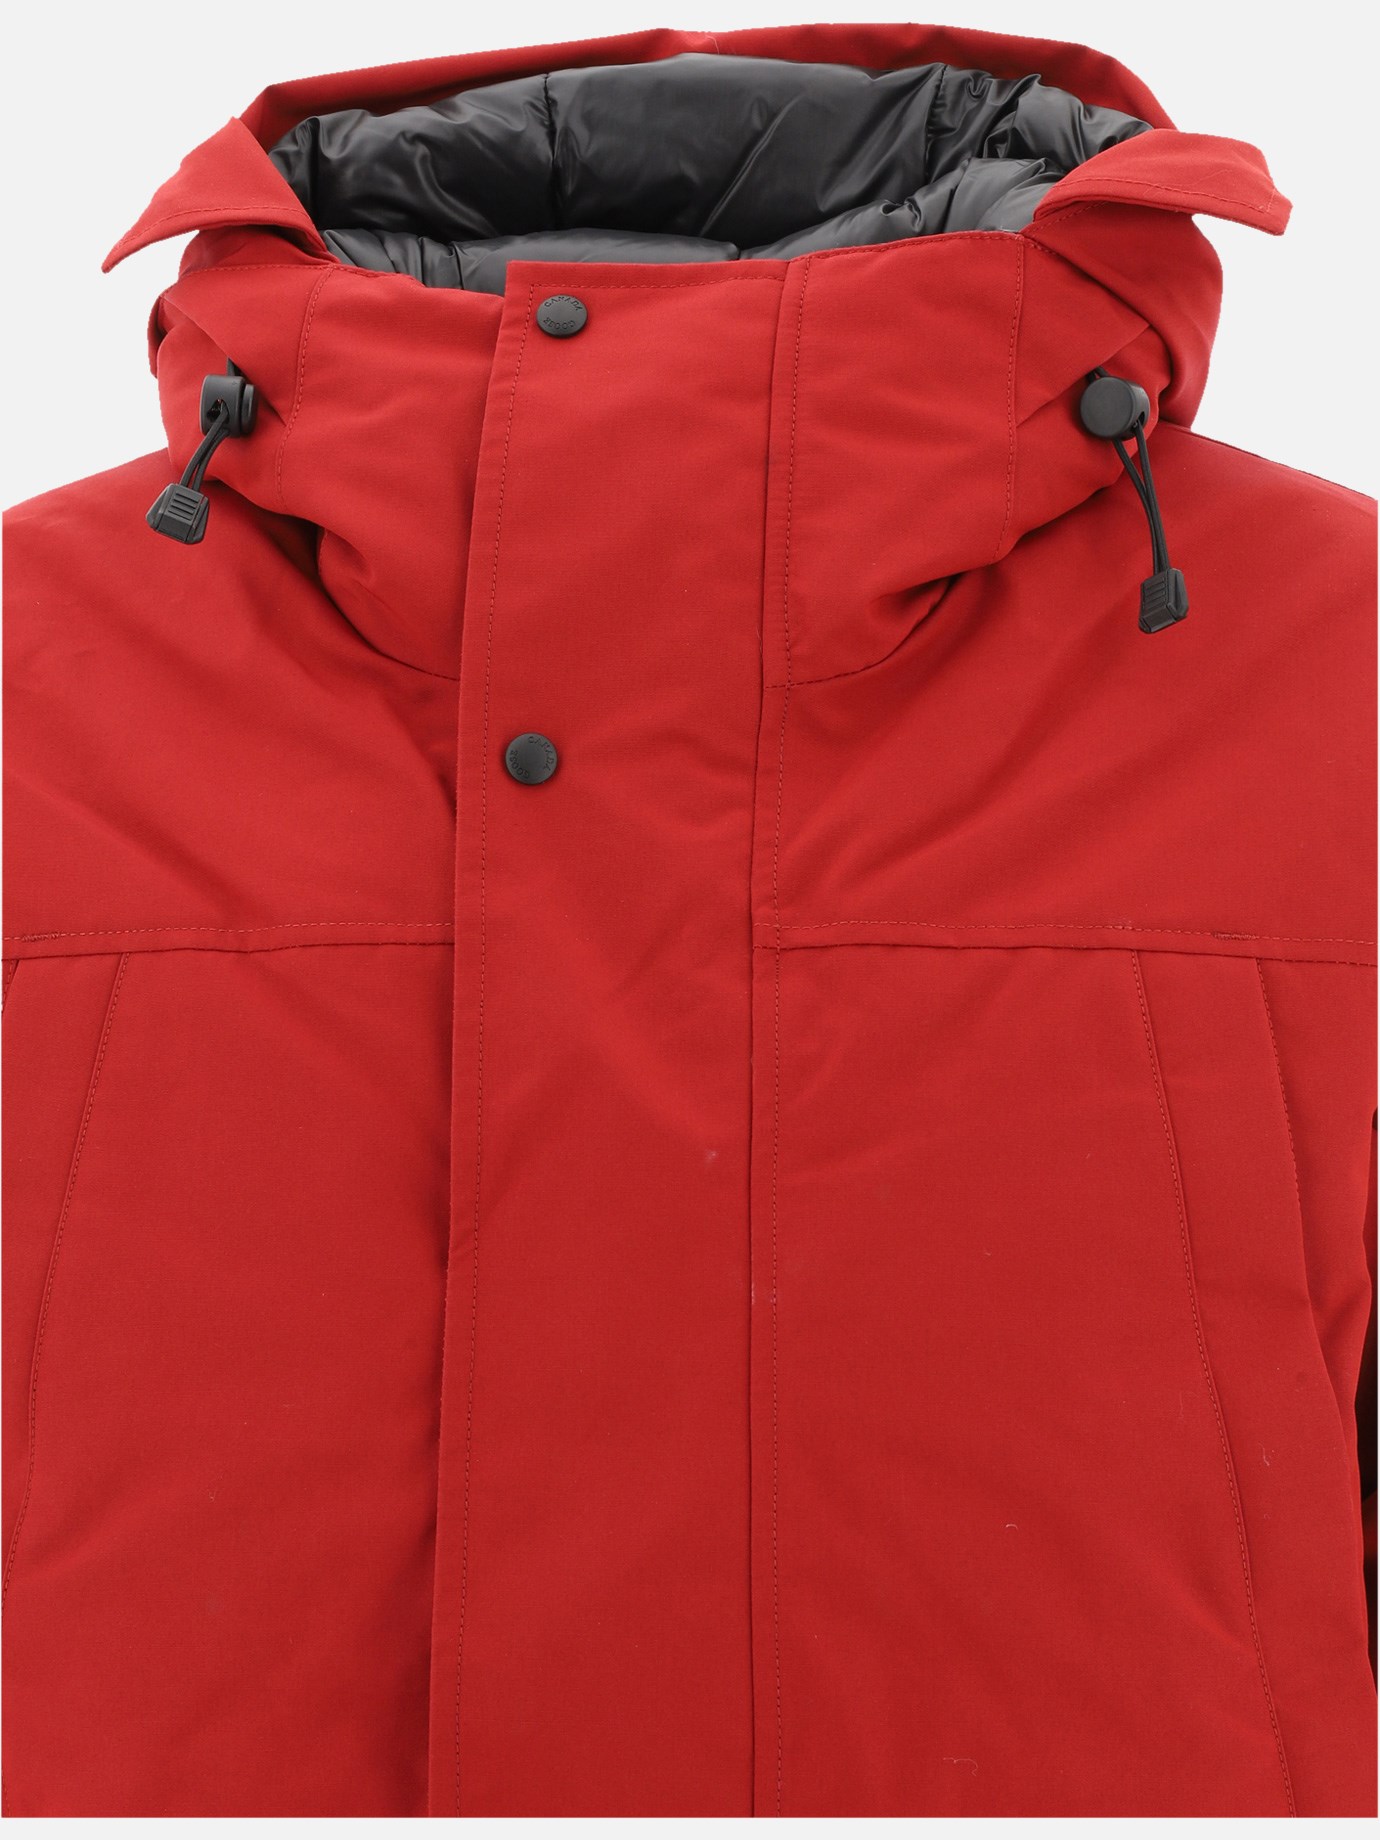  Sanford  down jacket by Canada Goose